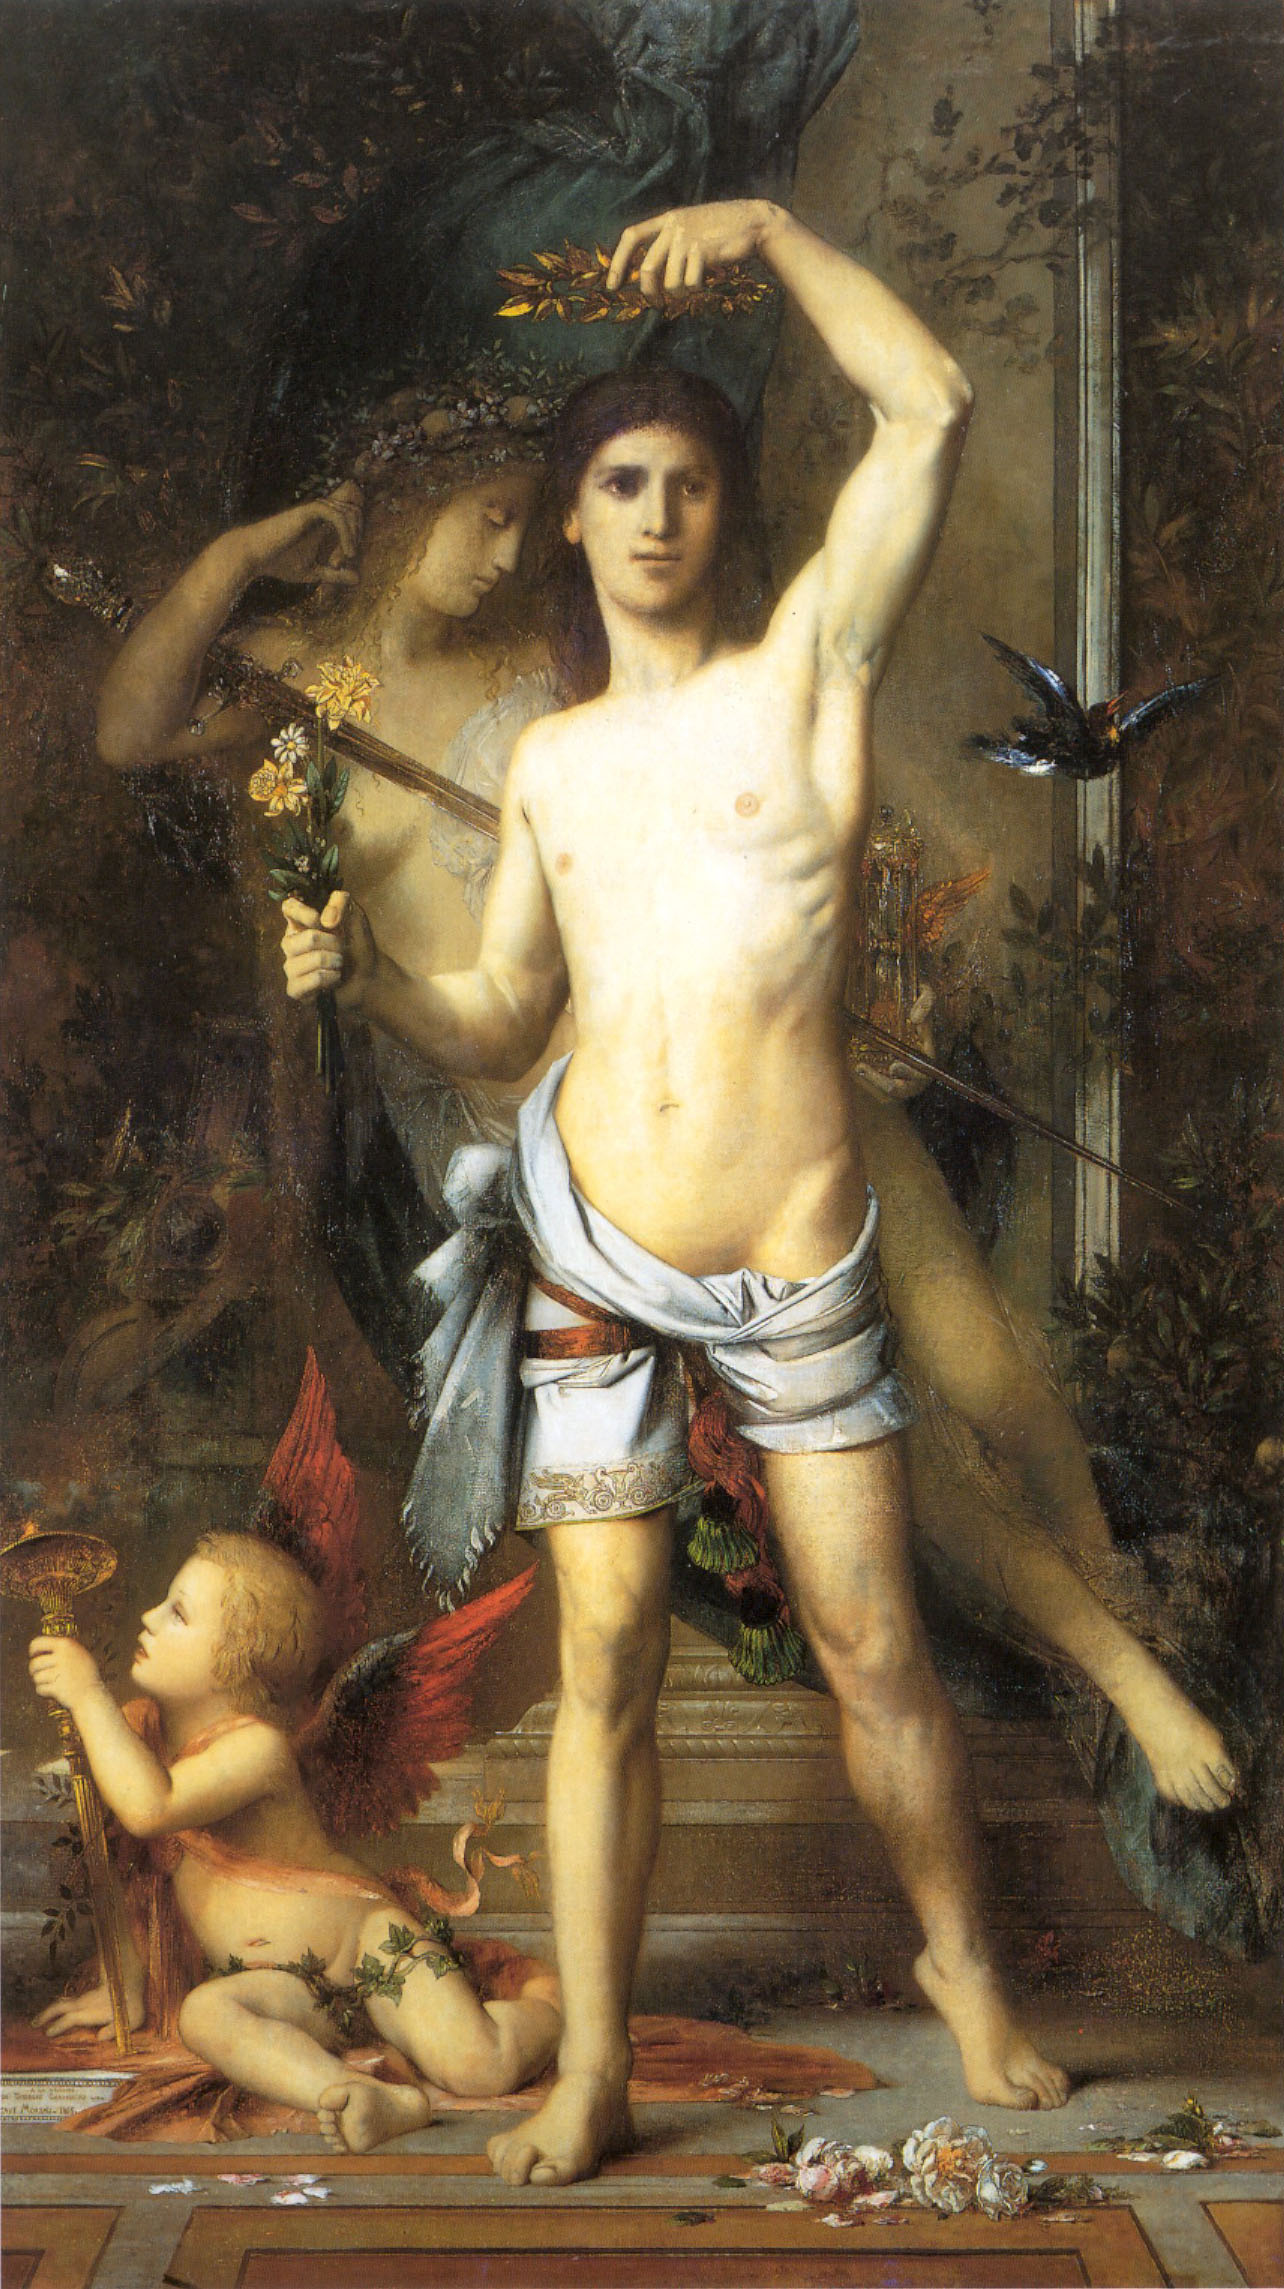 The Young Man and Death by Gustave Moreau -  1881 - 36 x 22.8cm Musée d'Orsay